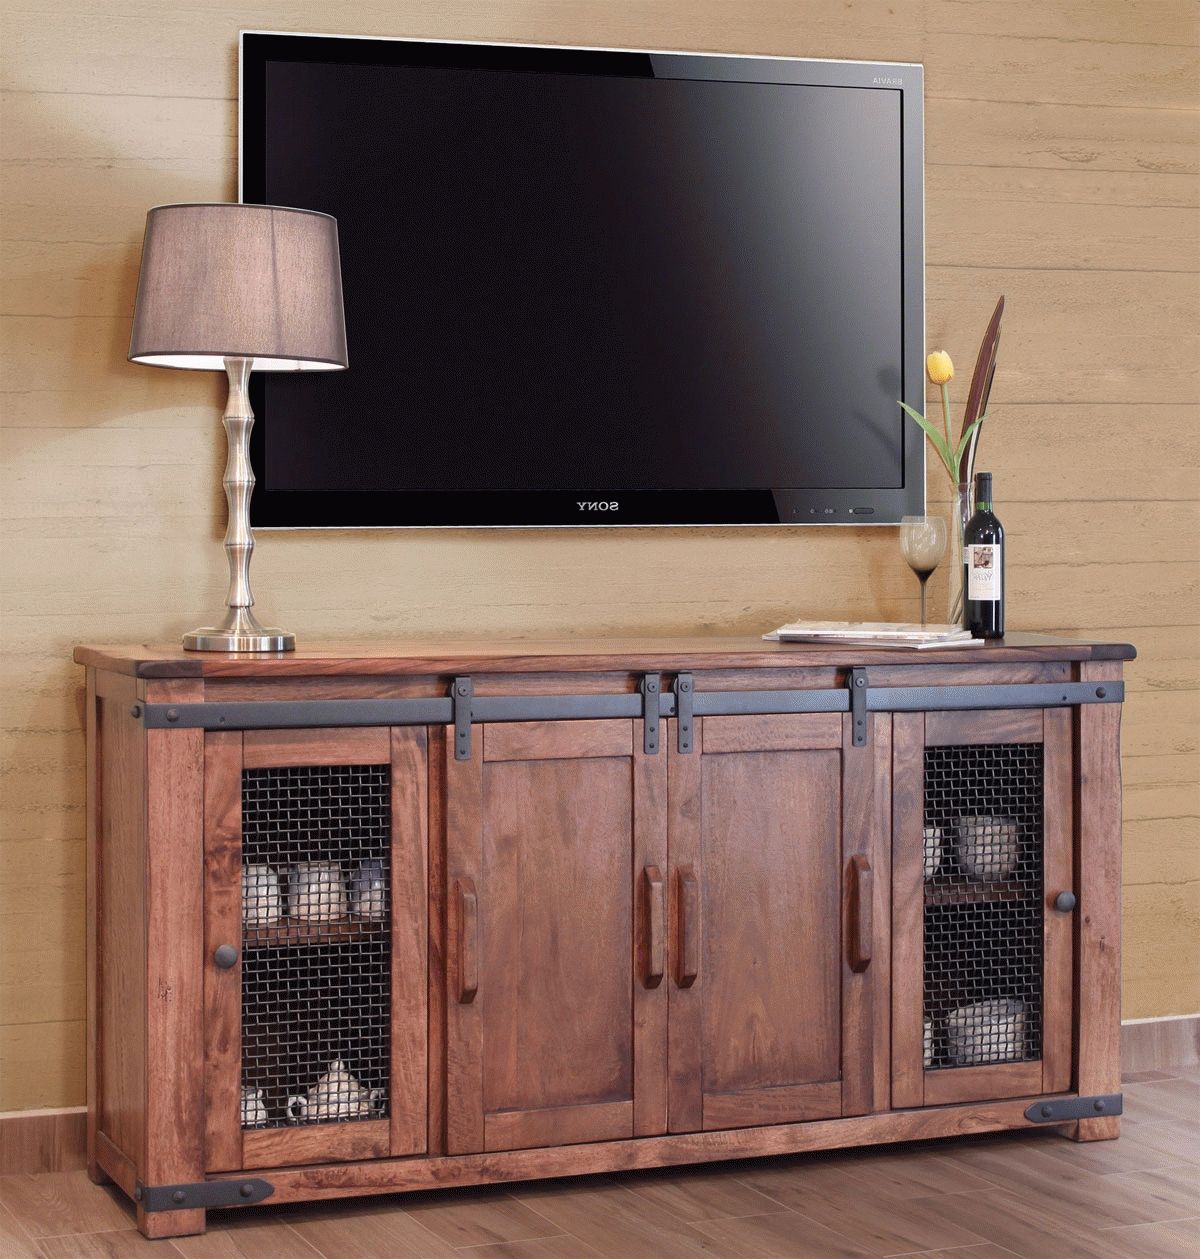 Rustic Tv Stand, Wood Tv Stand, Pine Tv Stand For Rustic 60 Inch Tv Stands (View 2 of 15)